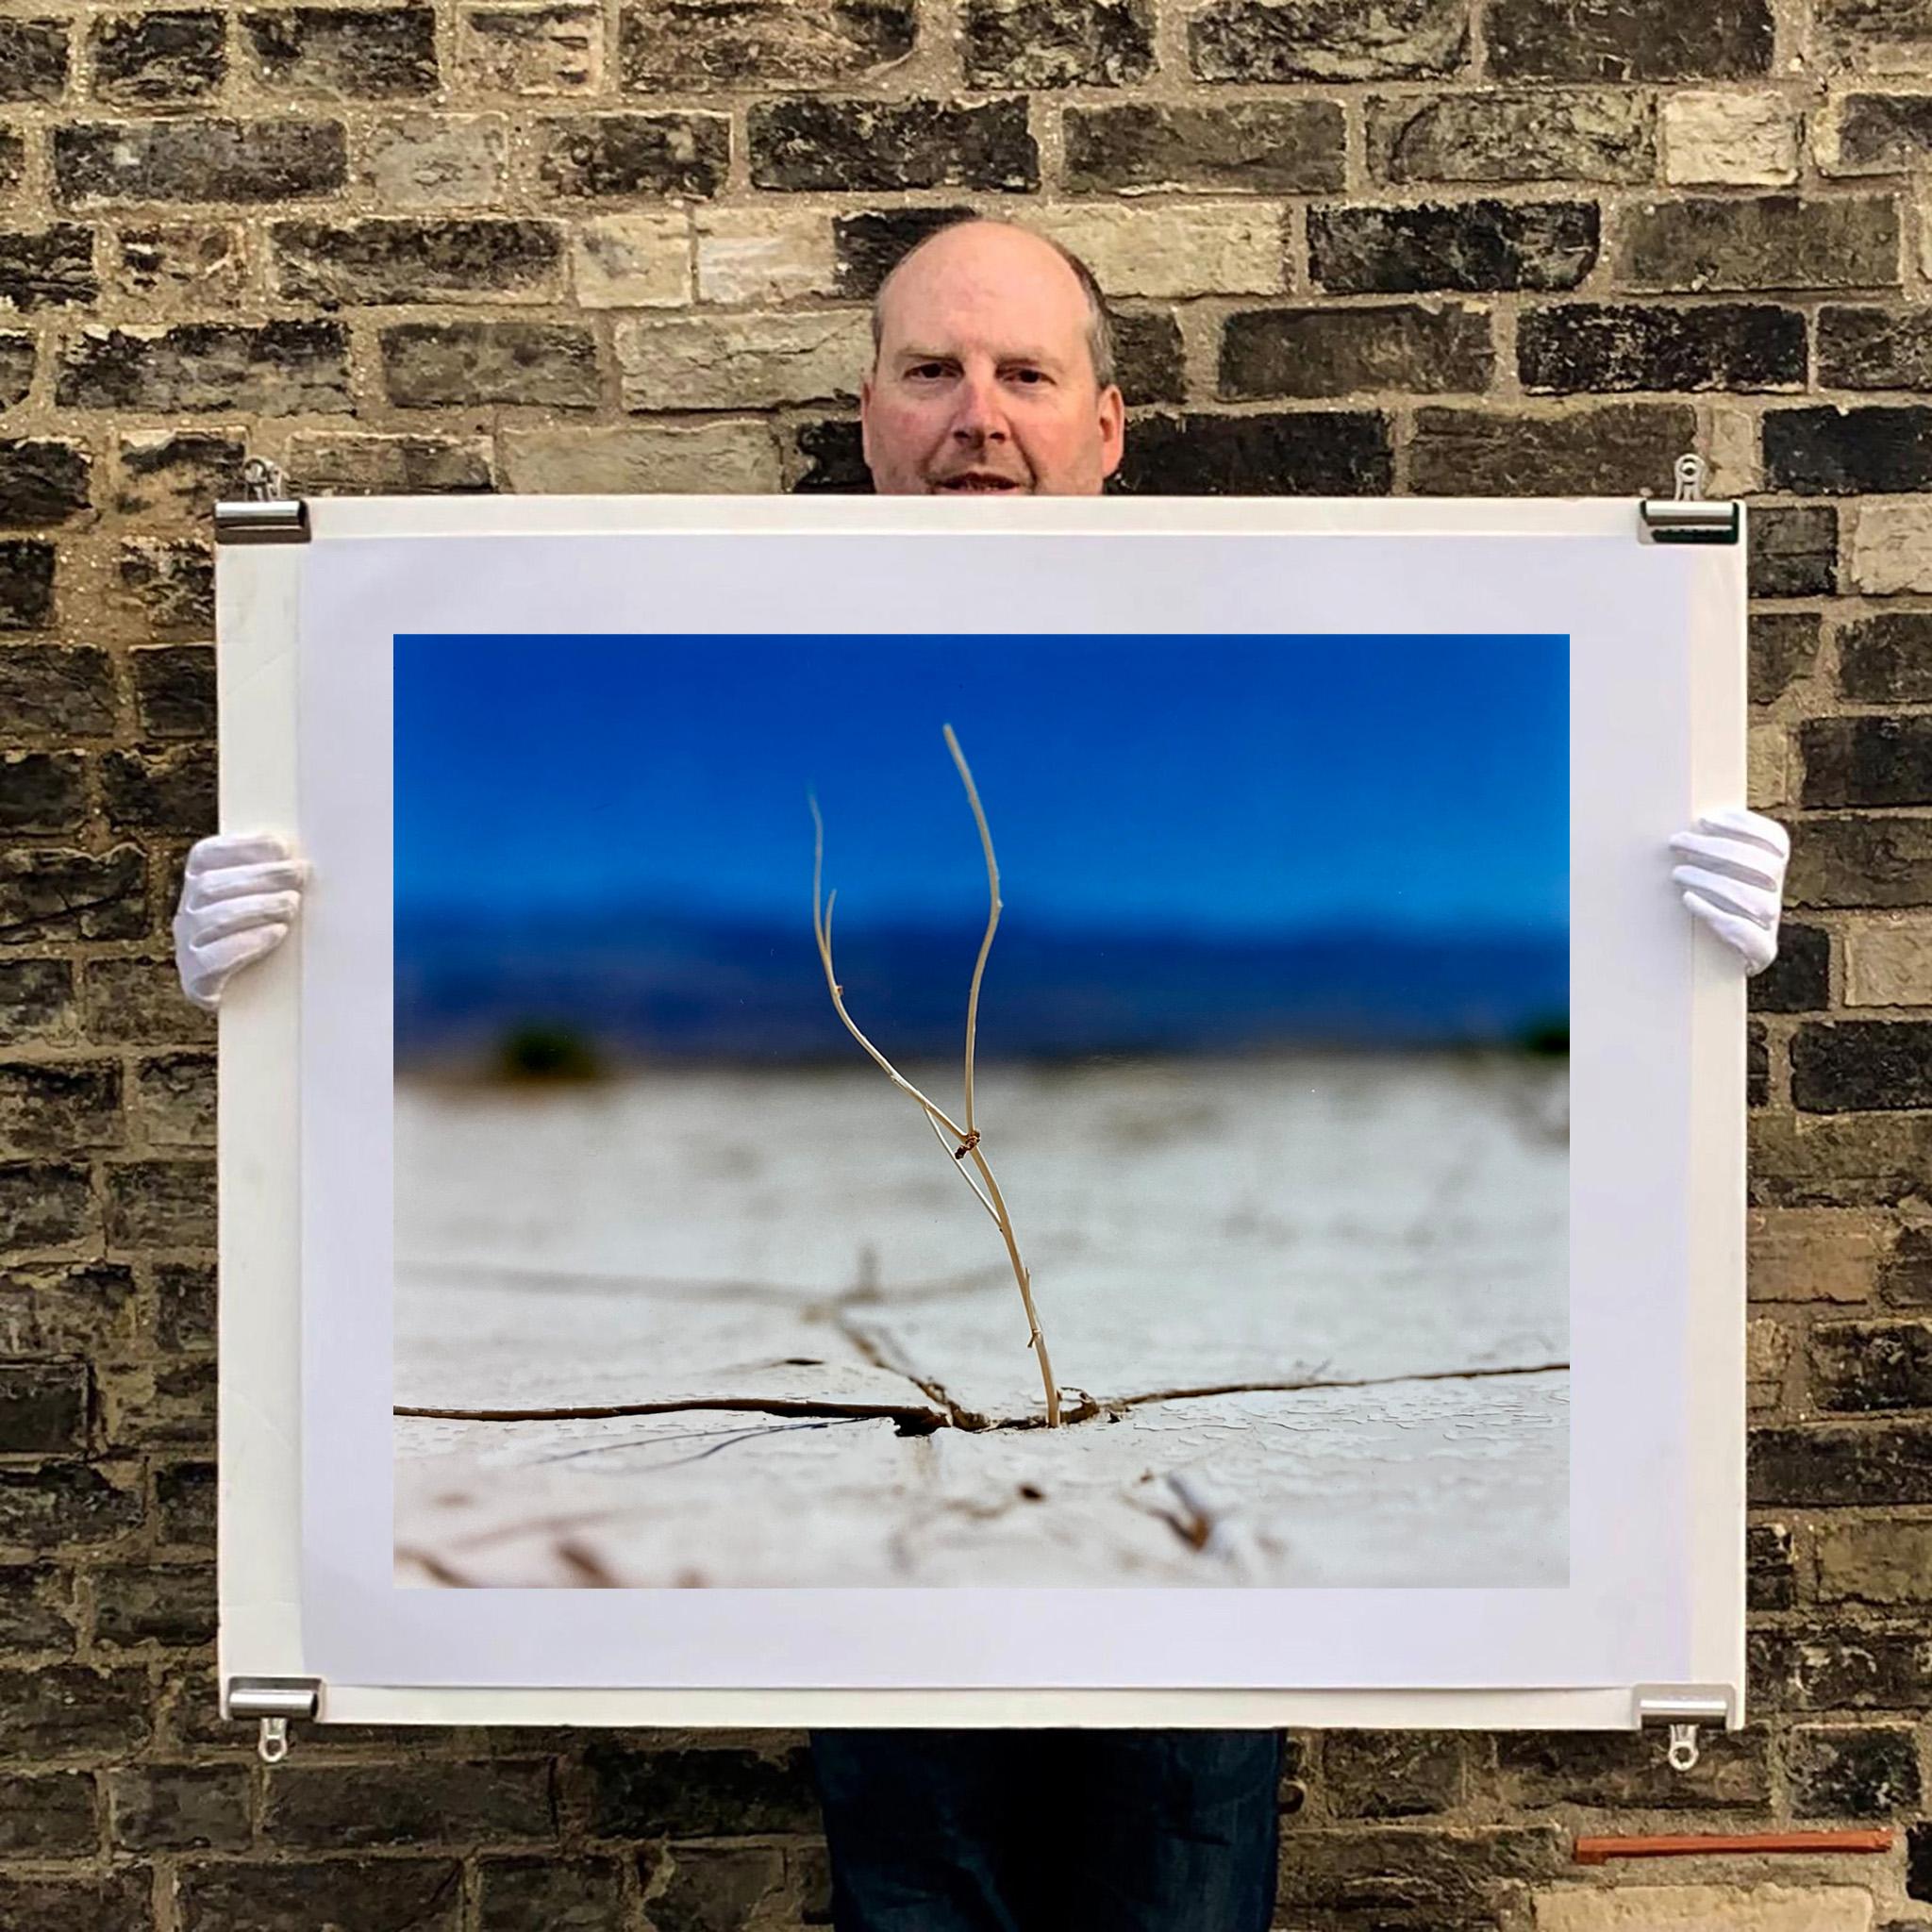 'Florescence', photograph from Richard Heeps' 'Dream in Colour' series taken in Panamint Valley, Death Valley National Park, California. This minimal landscape photograph uses a shallow depth of field emphasises a lone twig, a small sign of life,